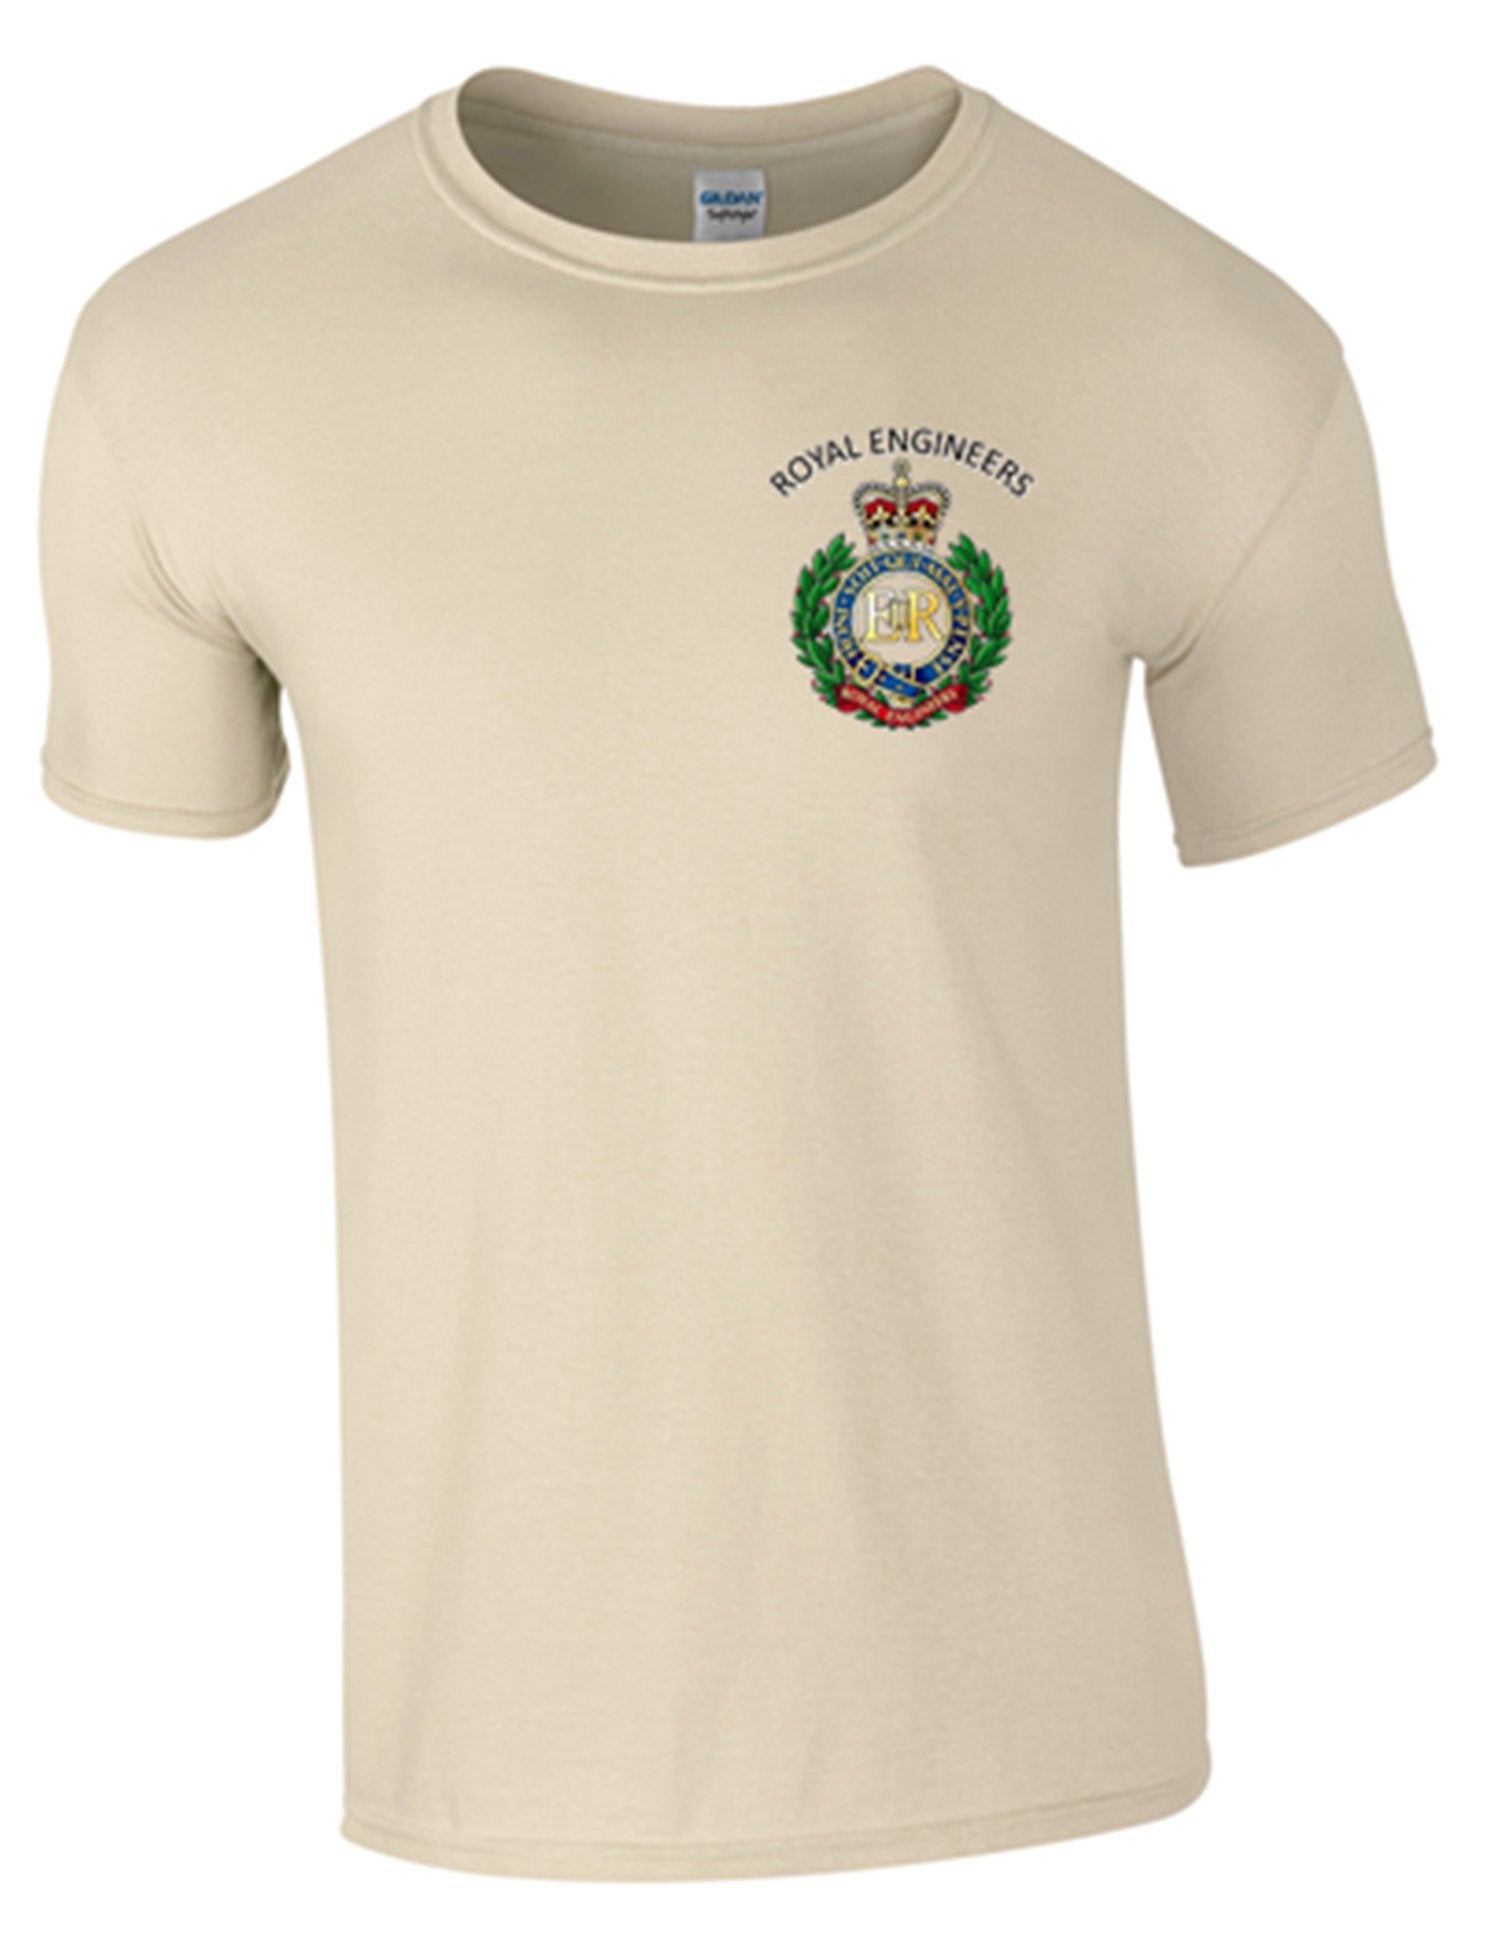 Royal Engineers T-Shirt Front Logo only Official MOD Approved Merchandise - Army 1157 kit Sand / M Army 1157 Kit